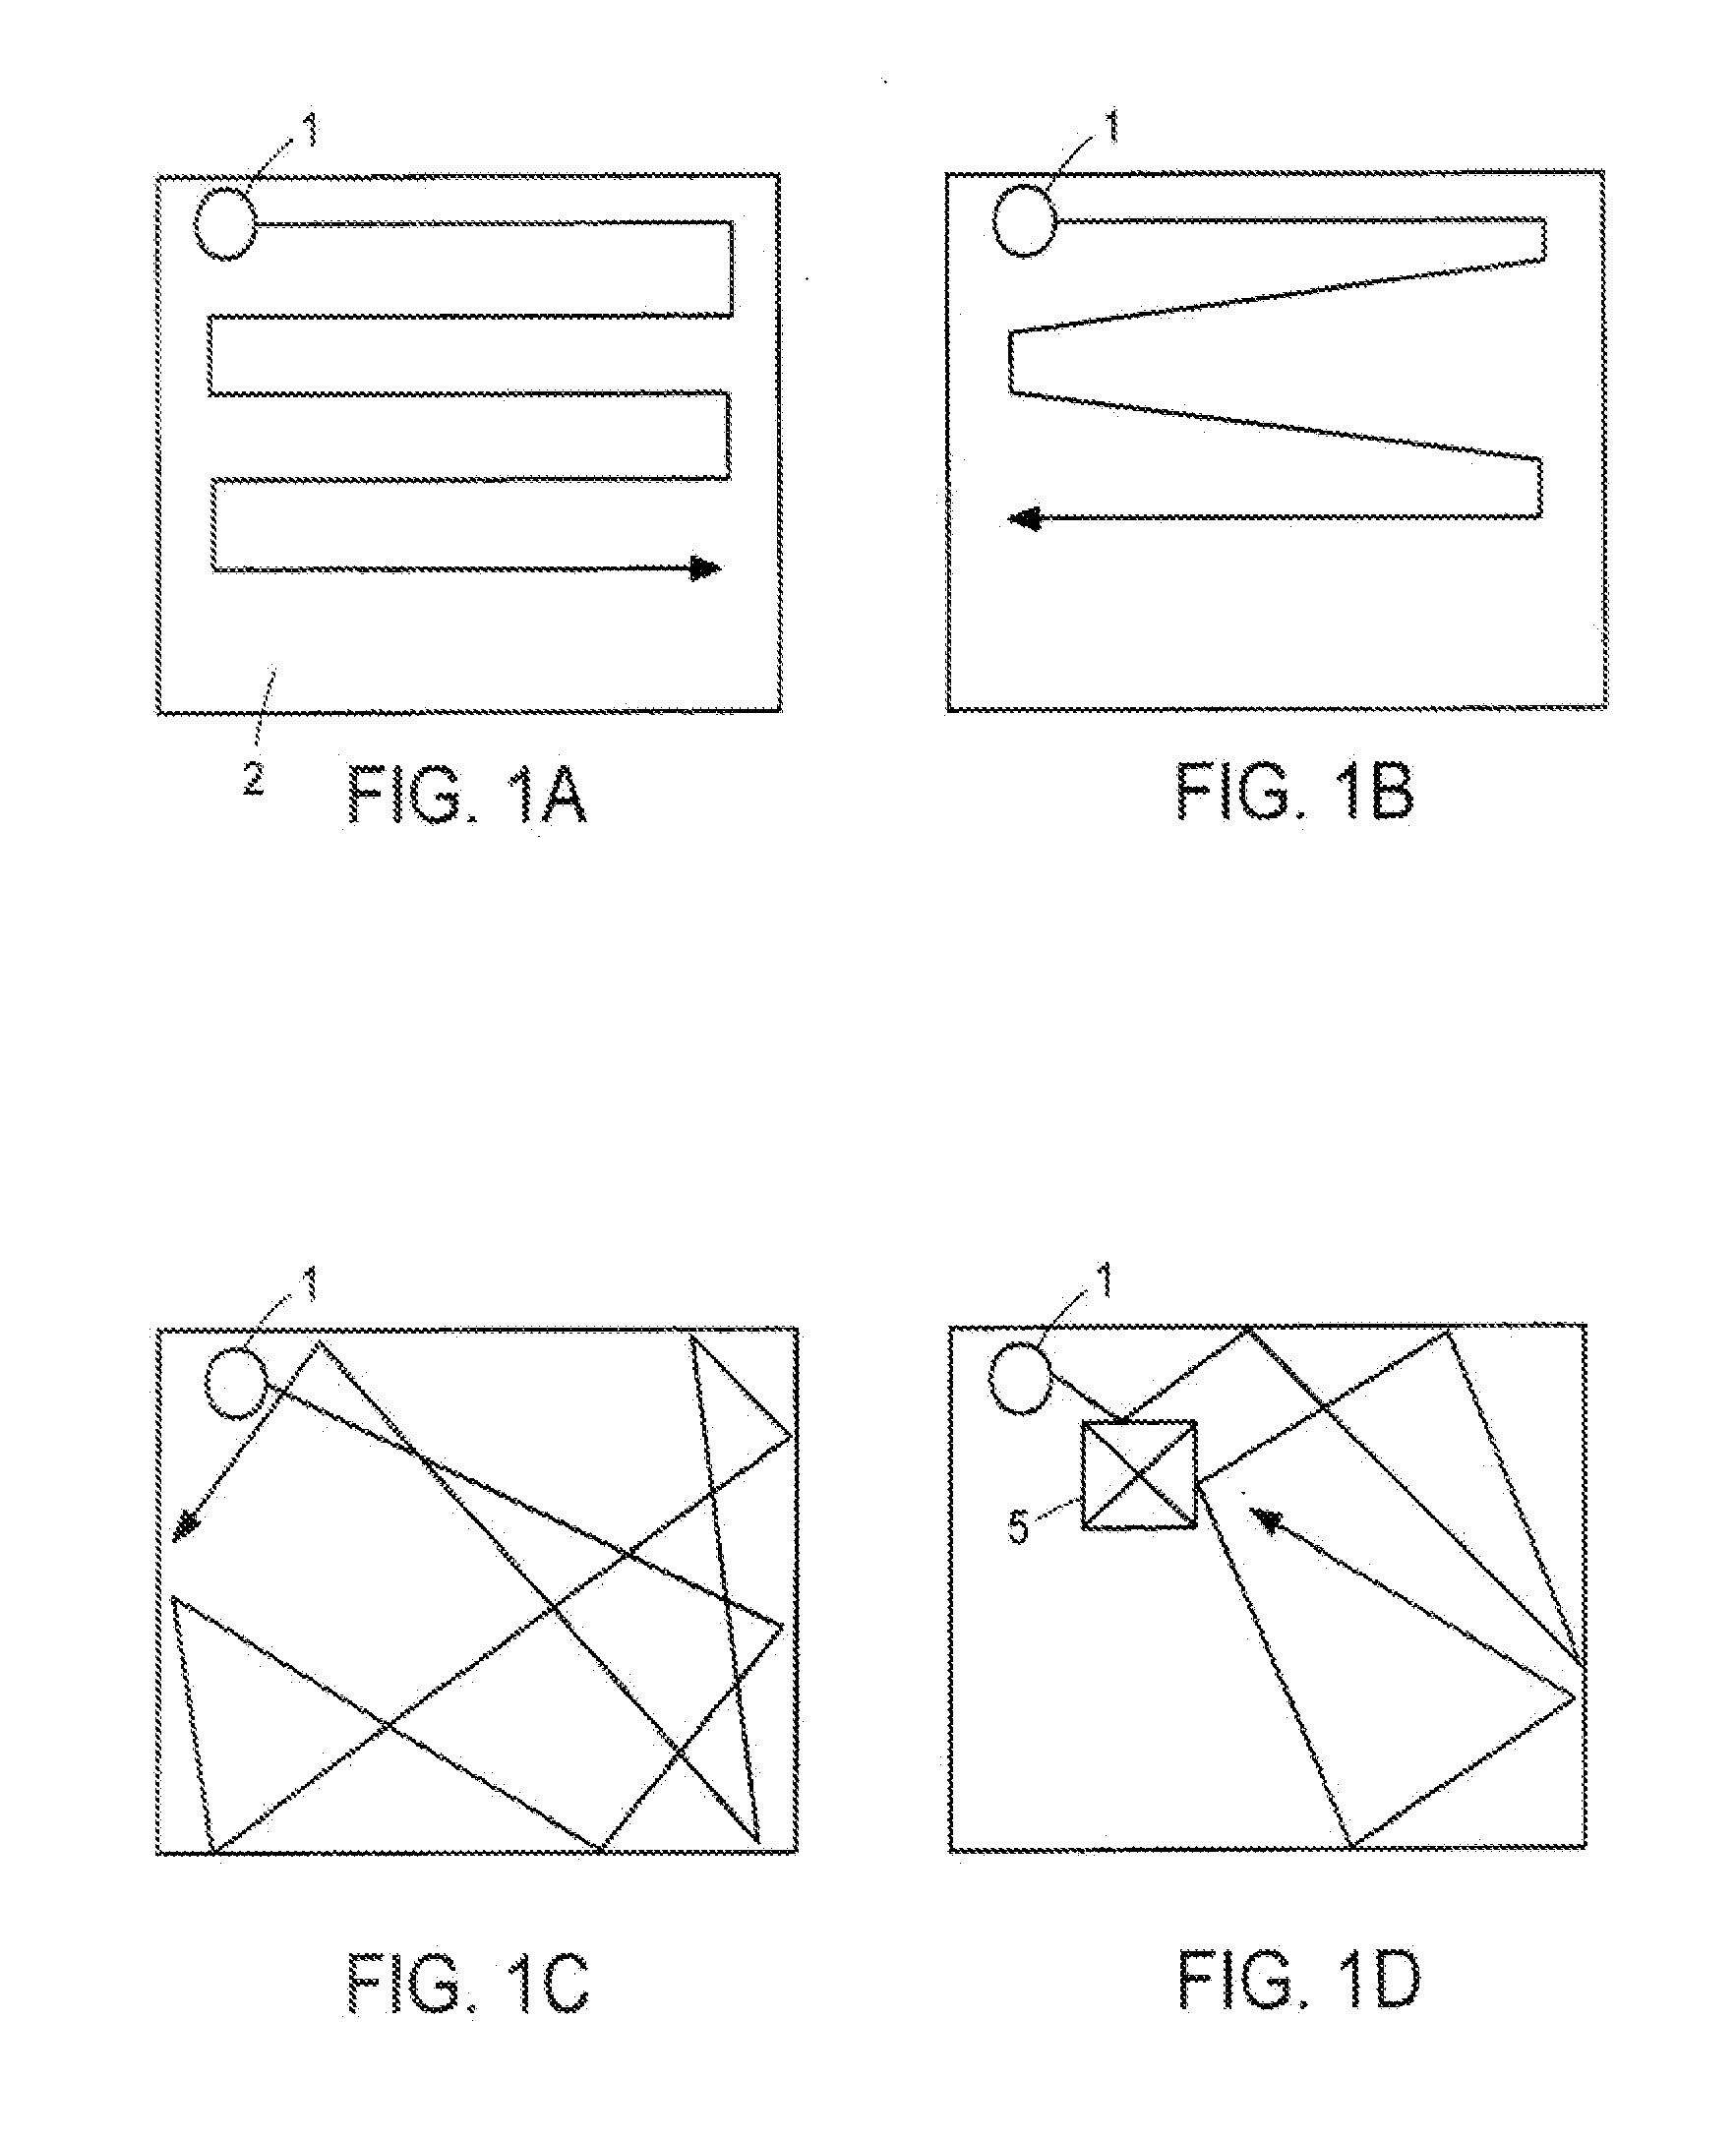 Method and System for Multi-Mode Coverage For An Autonomous Robot